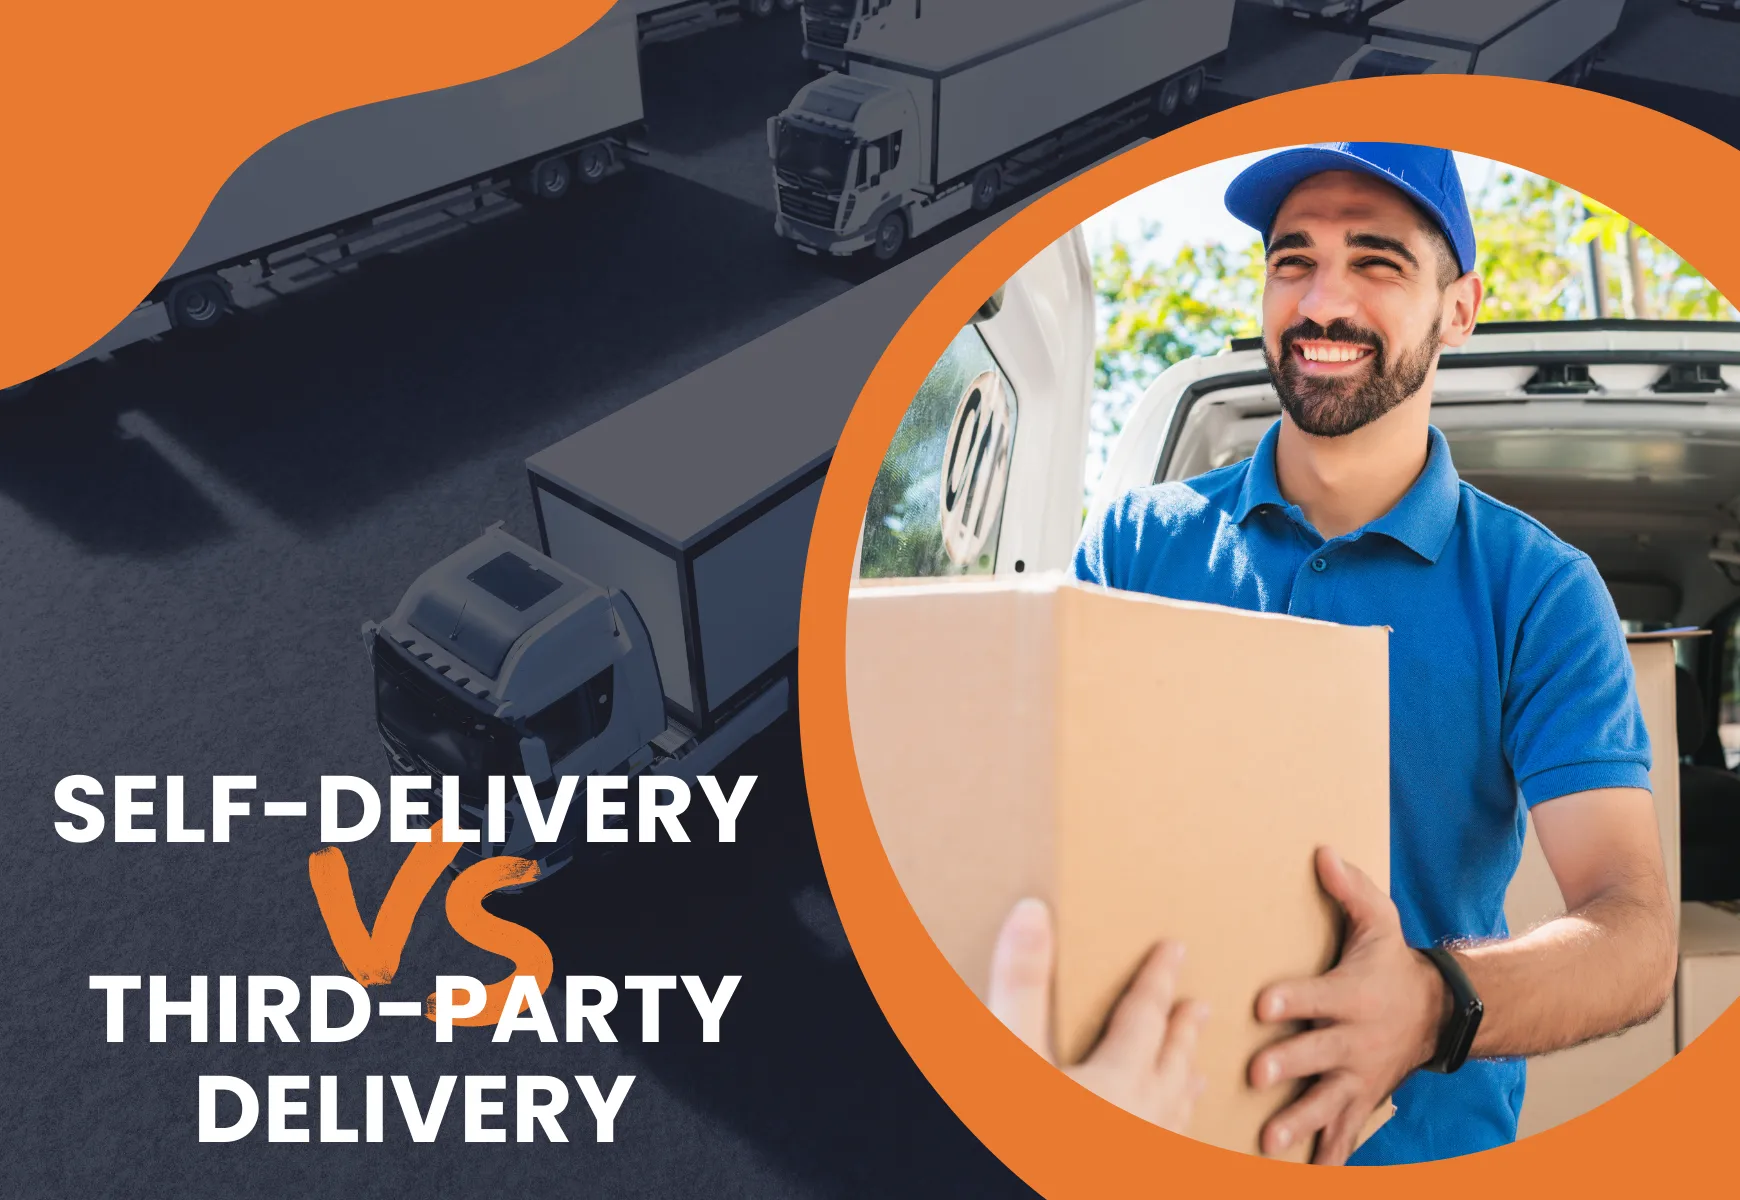 Self-Delivery vs Third-Party Delivery